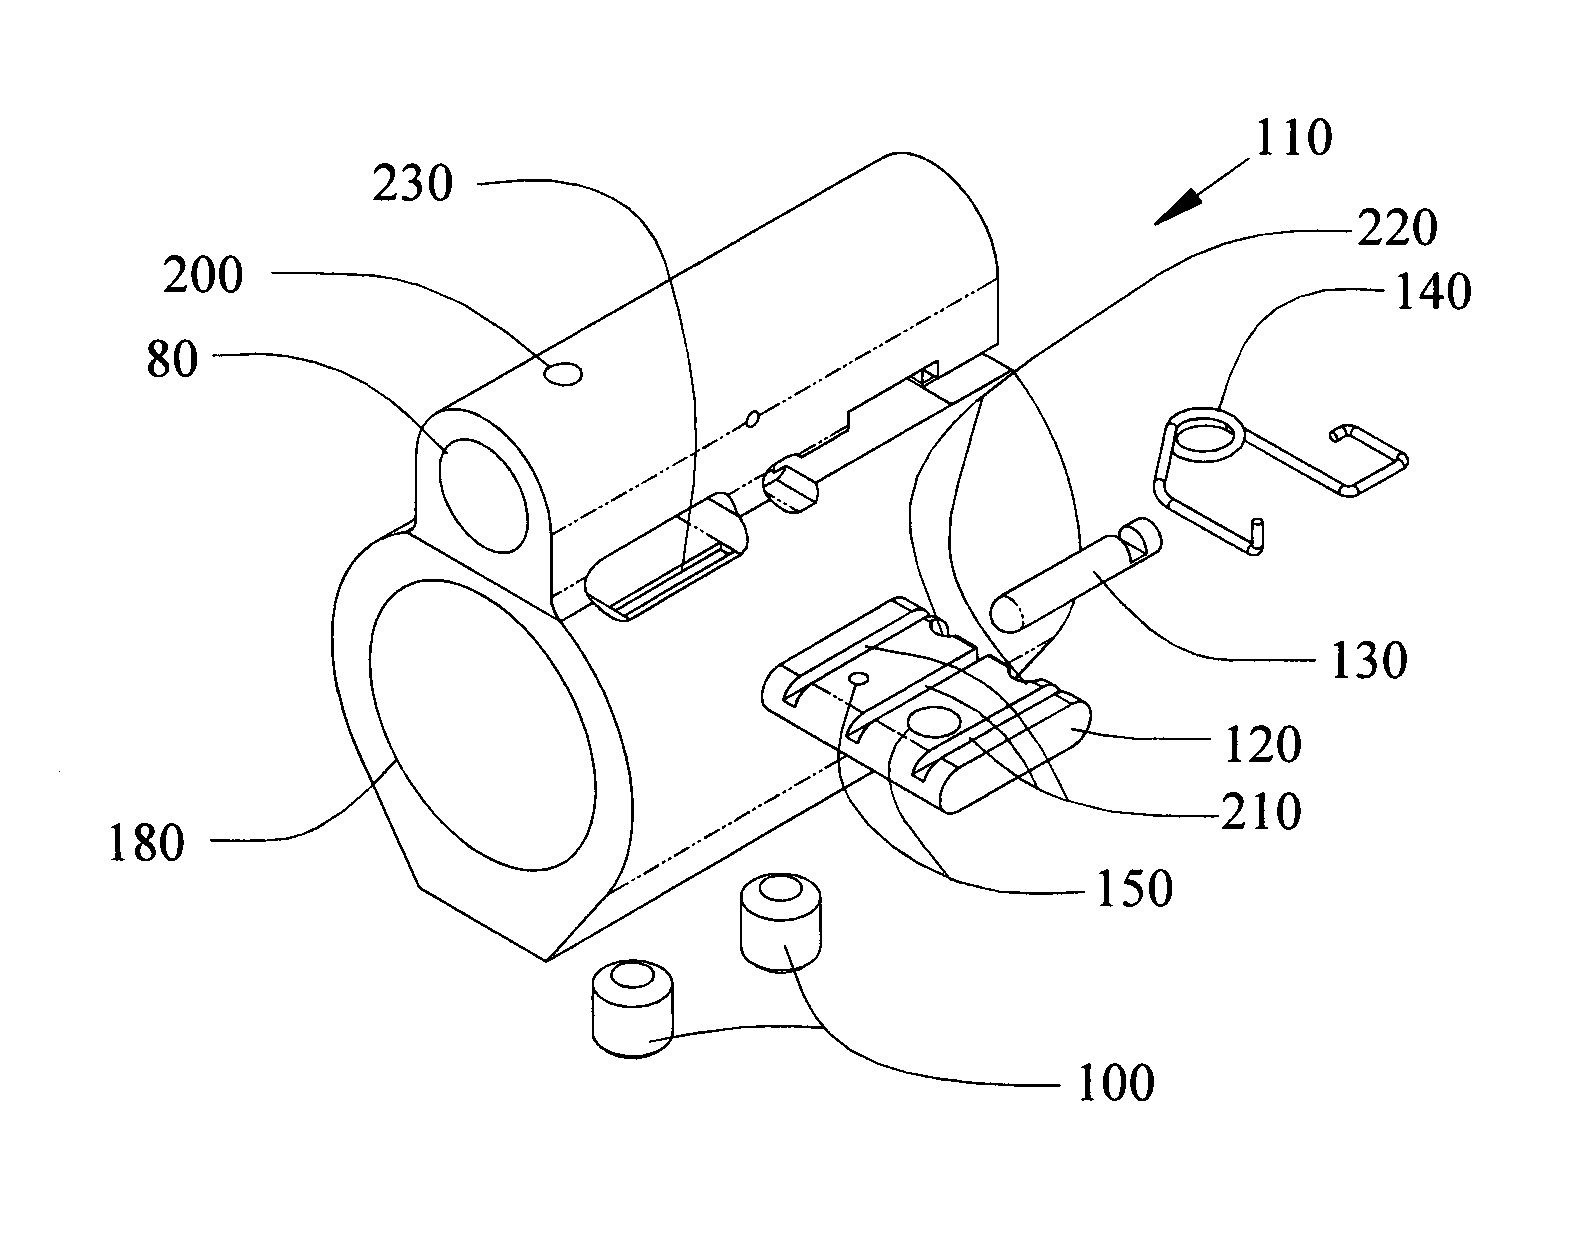 Adjustable gas block method, system and device for a gas operation firearm